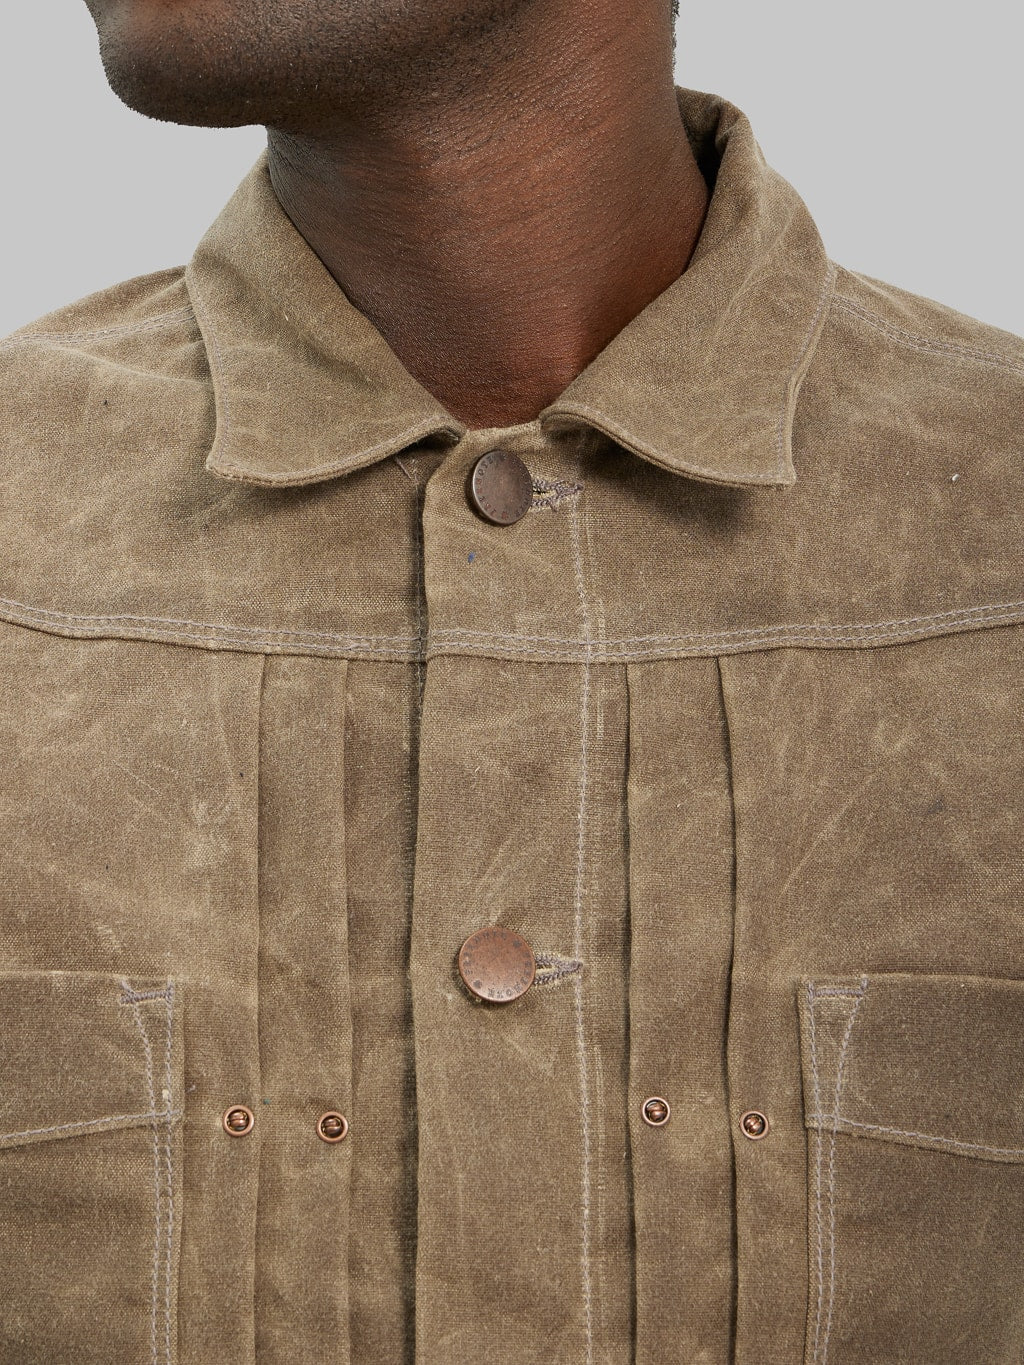 Freenote Cloth Riders Jacket Waxed Canvas Oak chest details